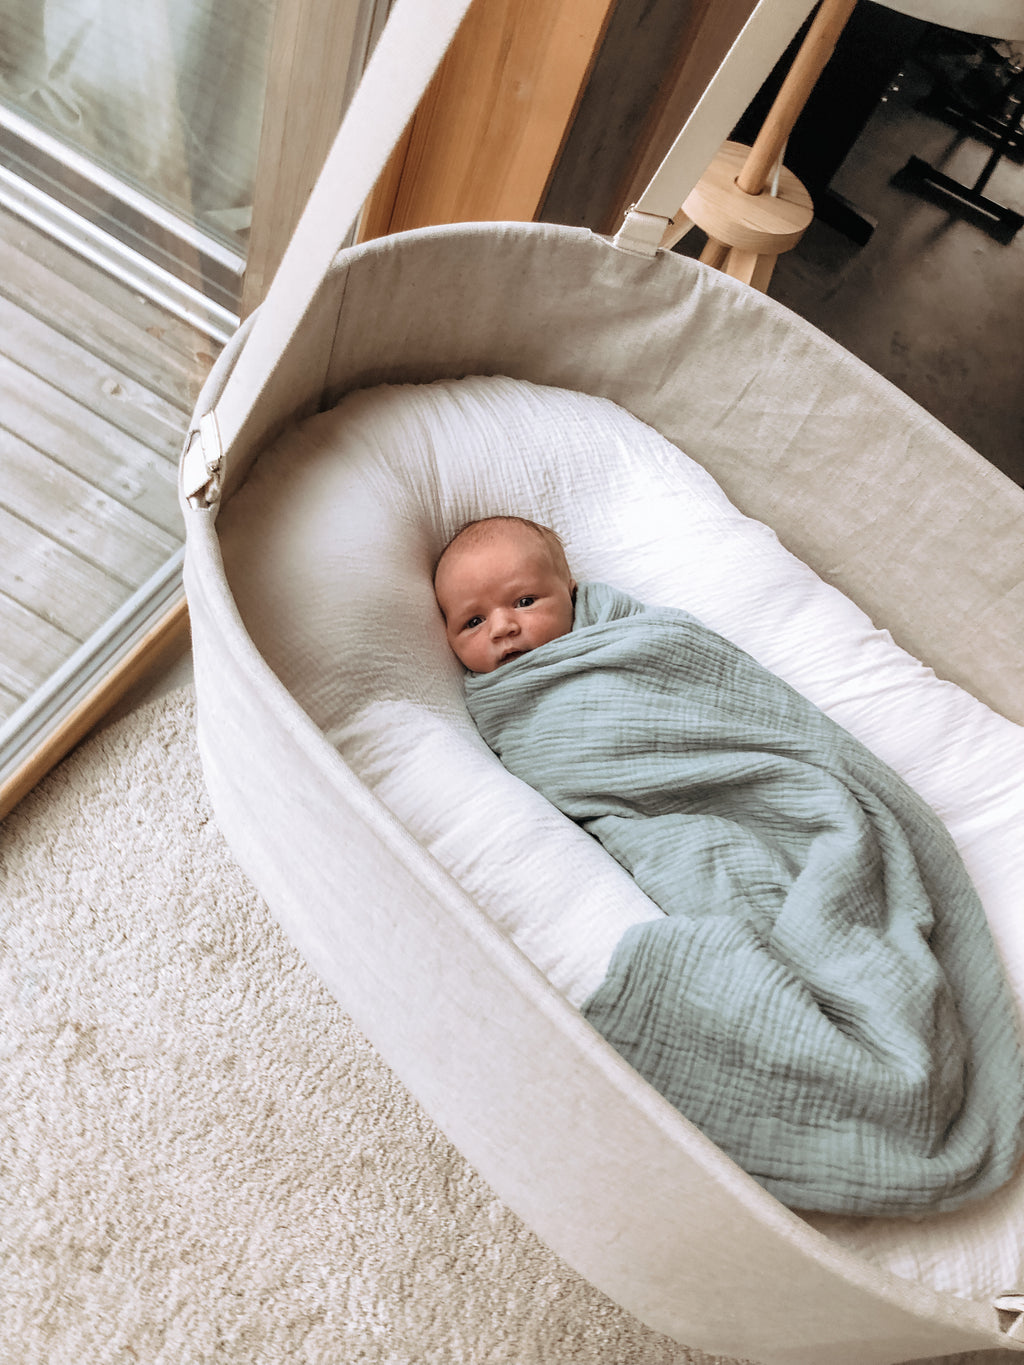 swaddle baby in bassinet